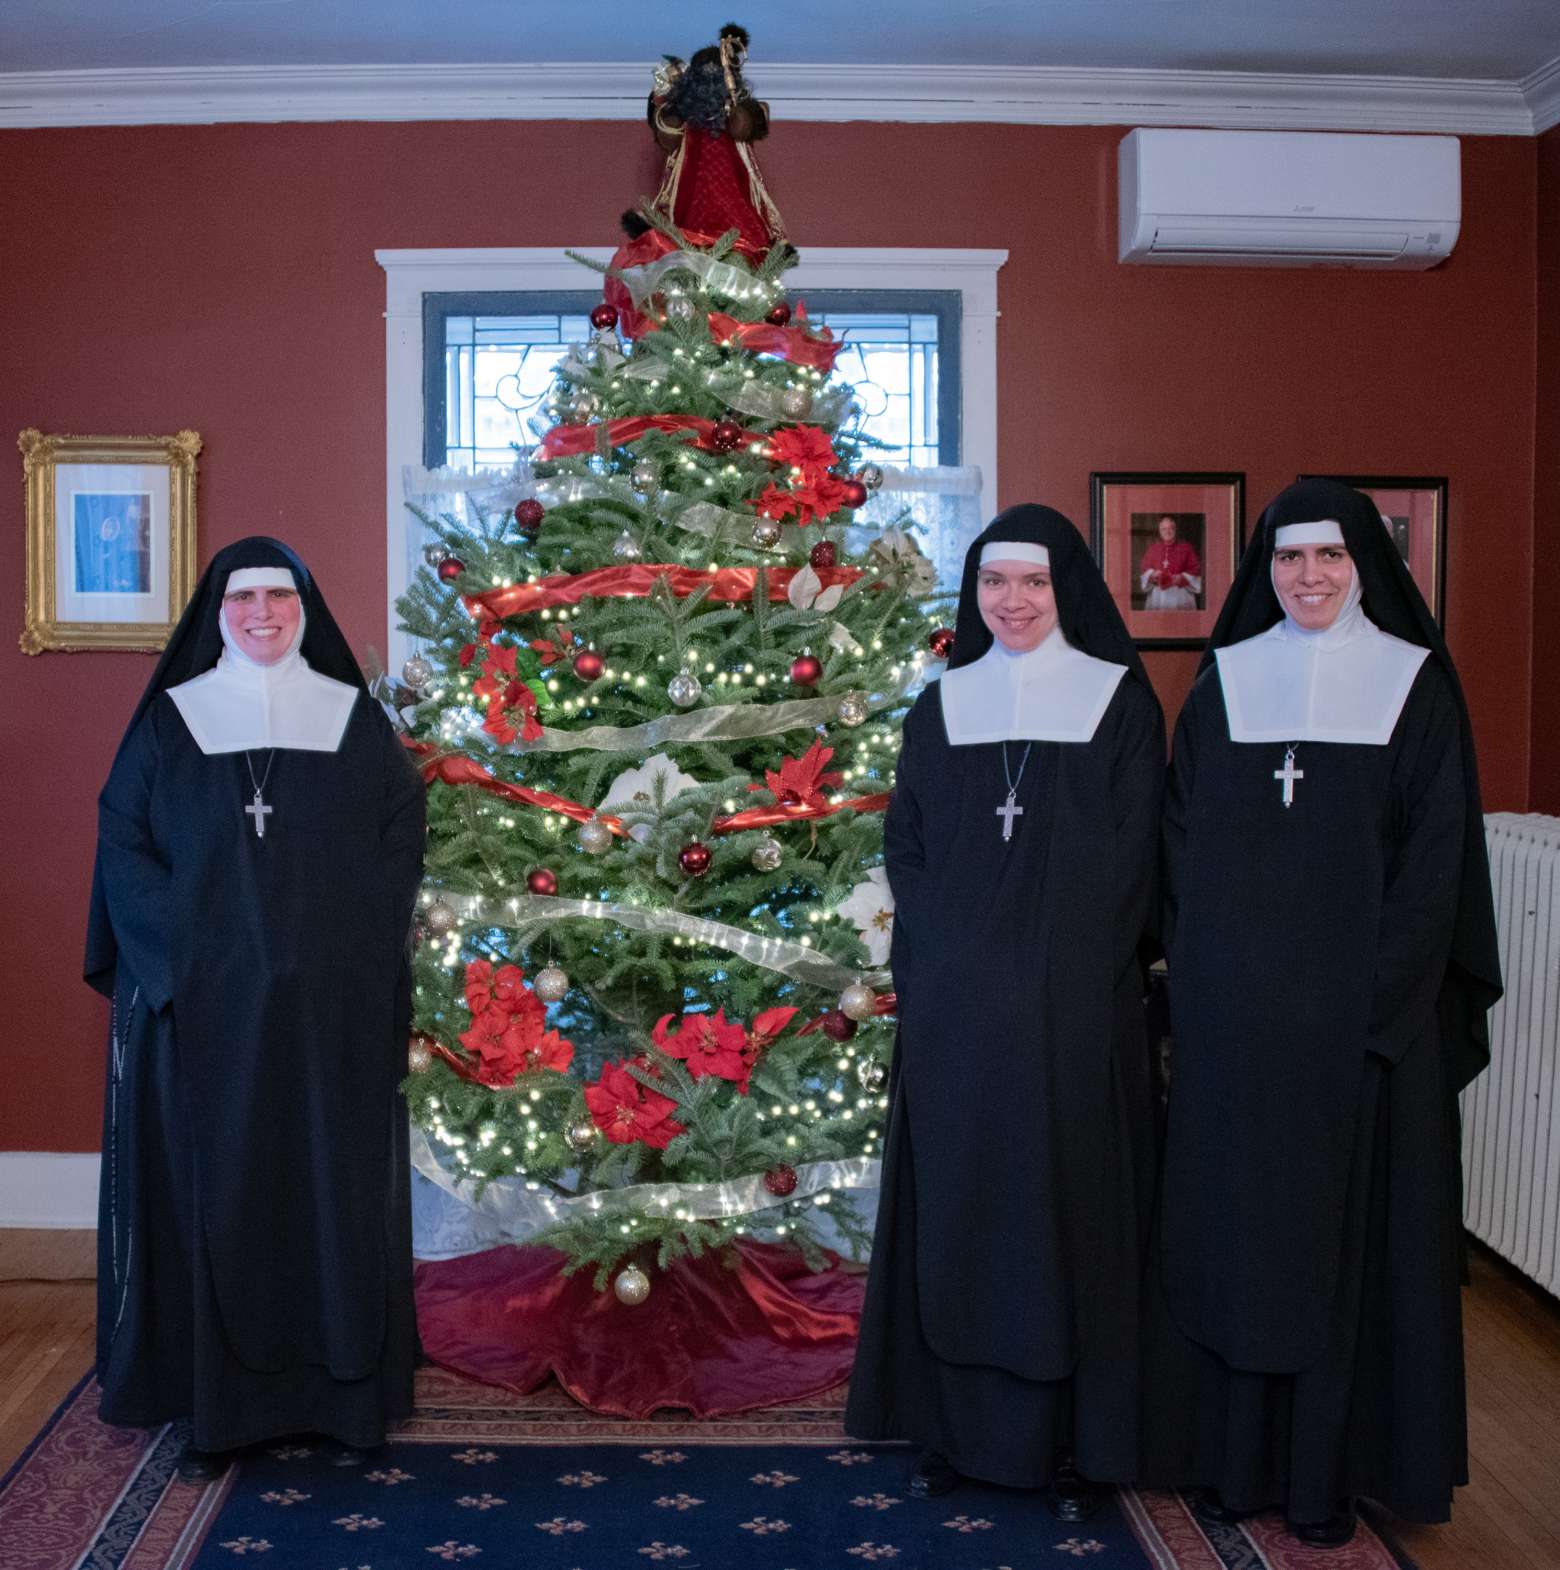 A Word from the Sister Adorers:  Christmas Greetings